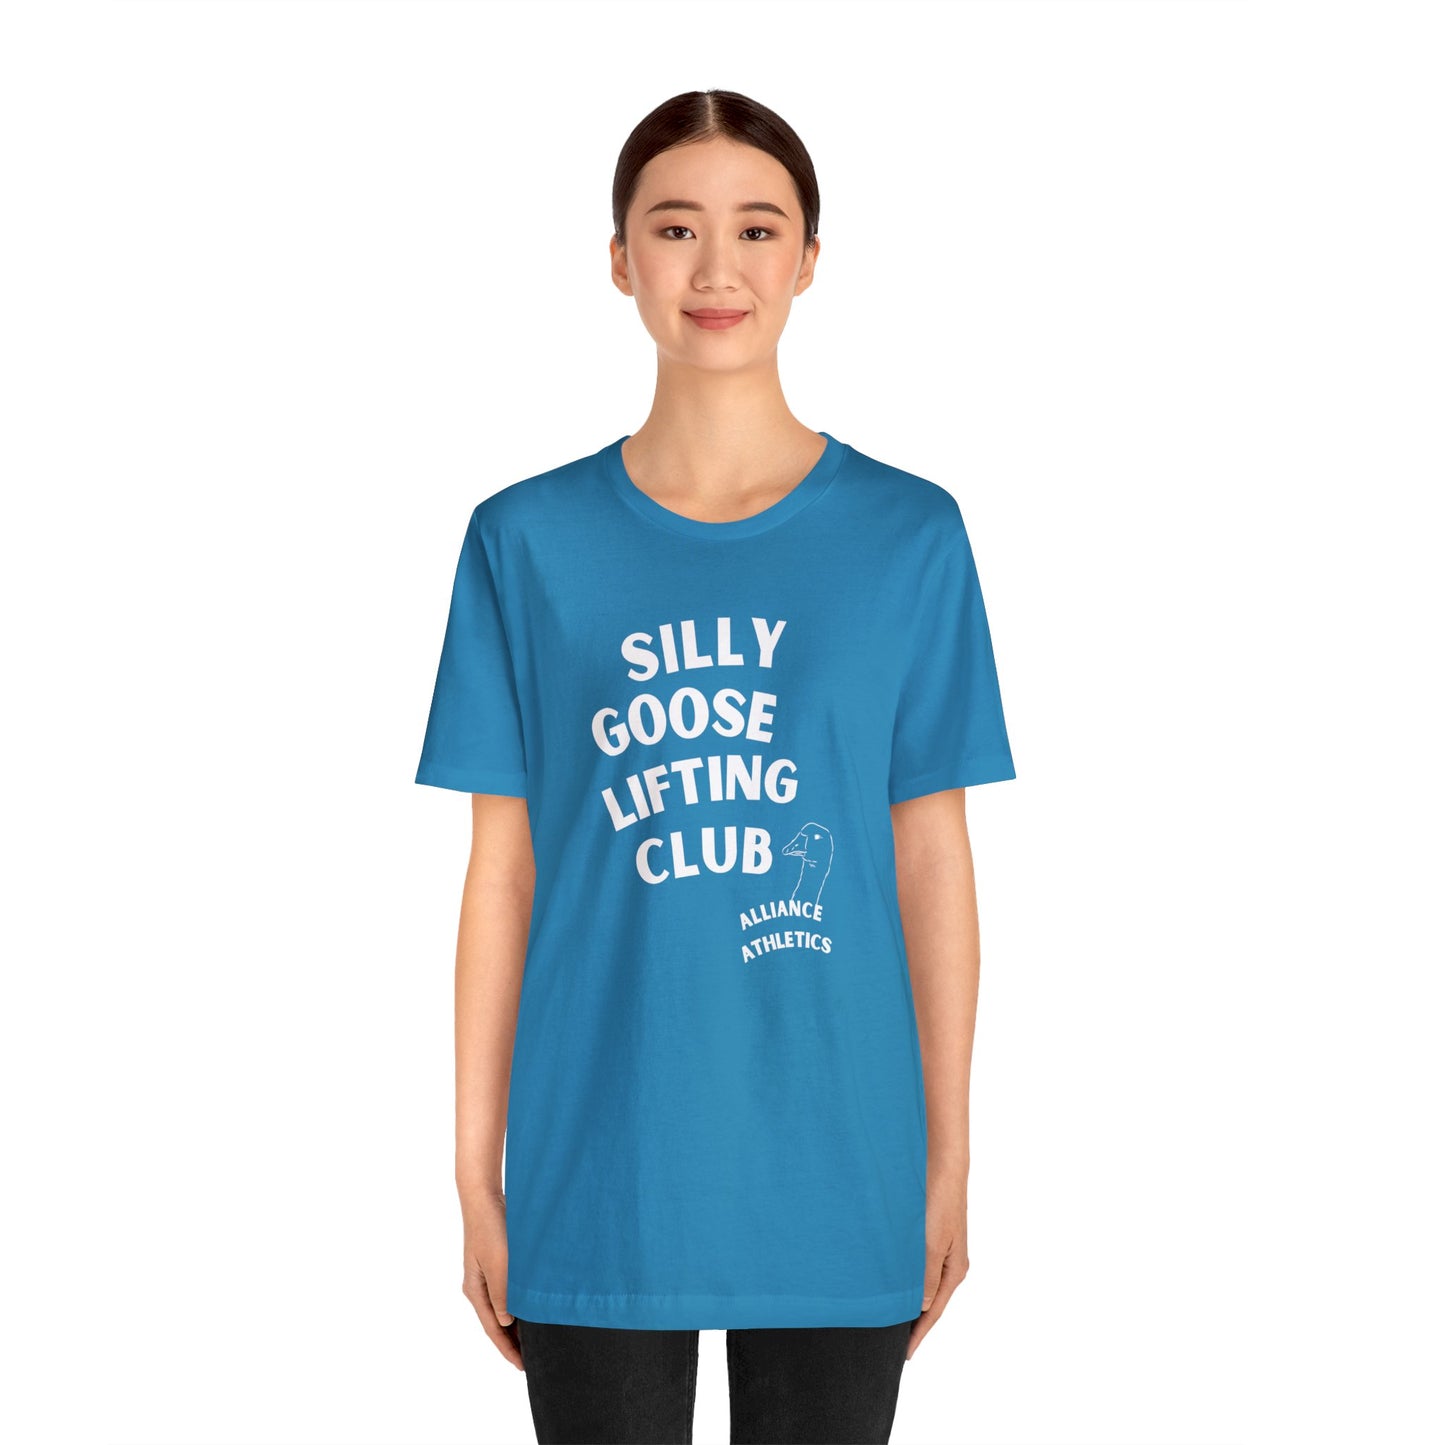 Silly Goose Lifting Club Tee